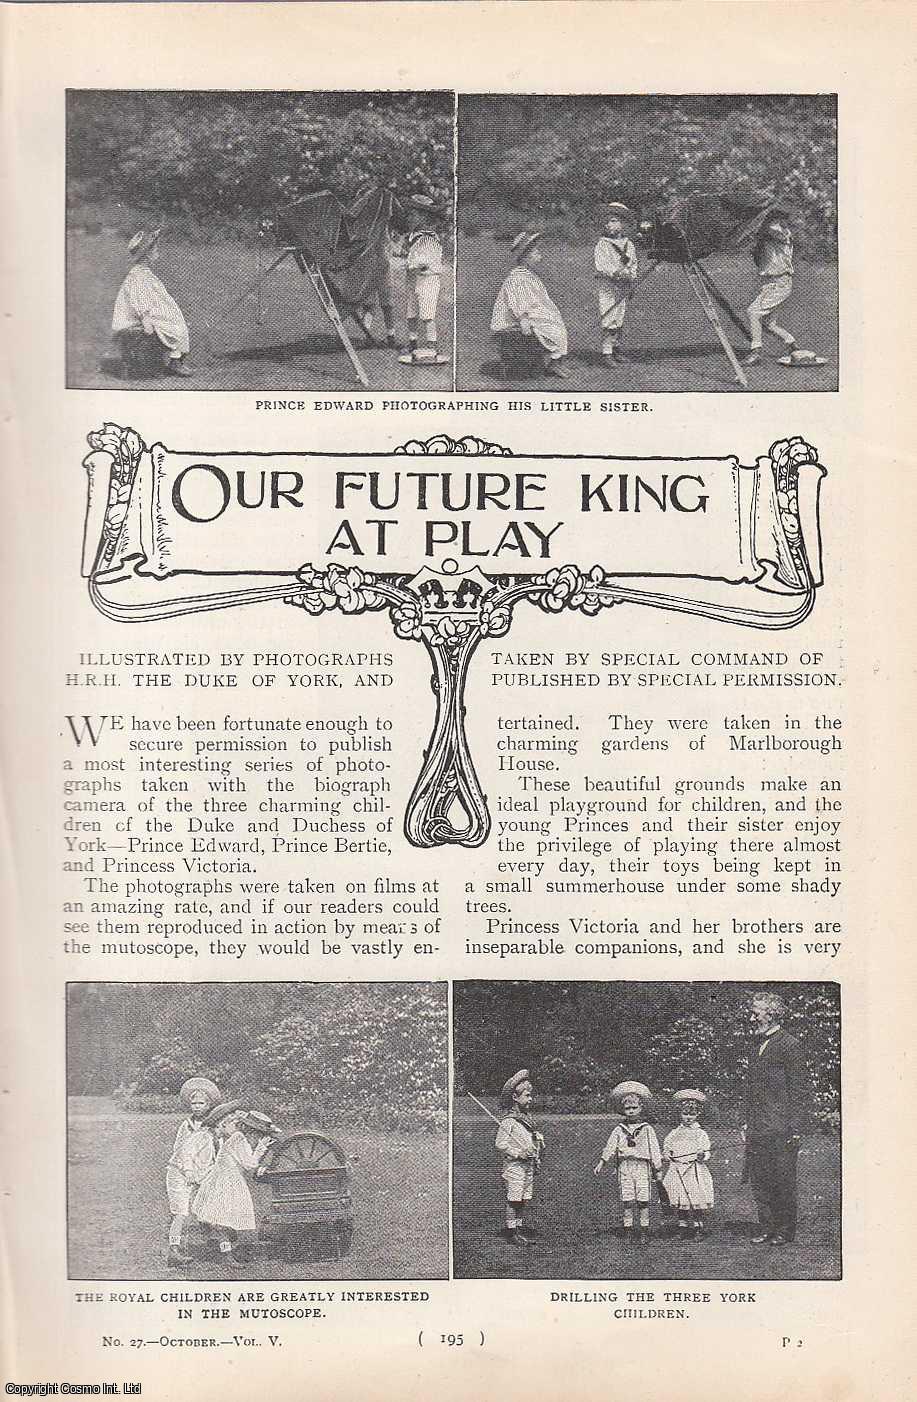 No Author Stated - The Duke & Duchess of York : Our Future King Edward at Play. An uncommon original article from the Harmsworth London Magazine, 1901.